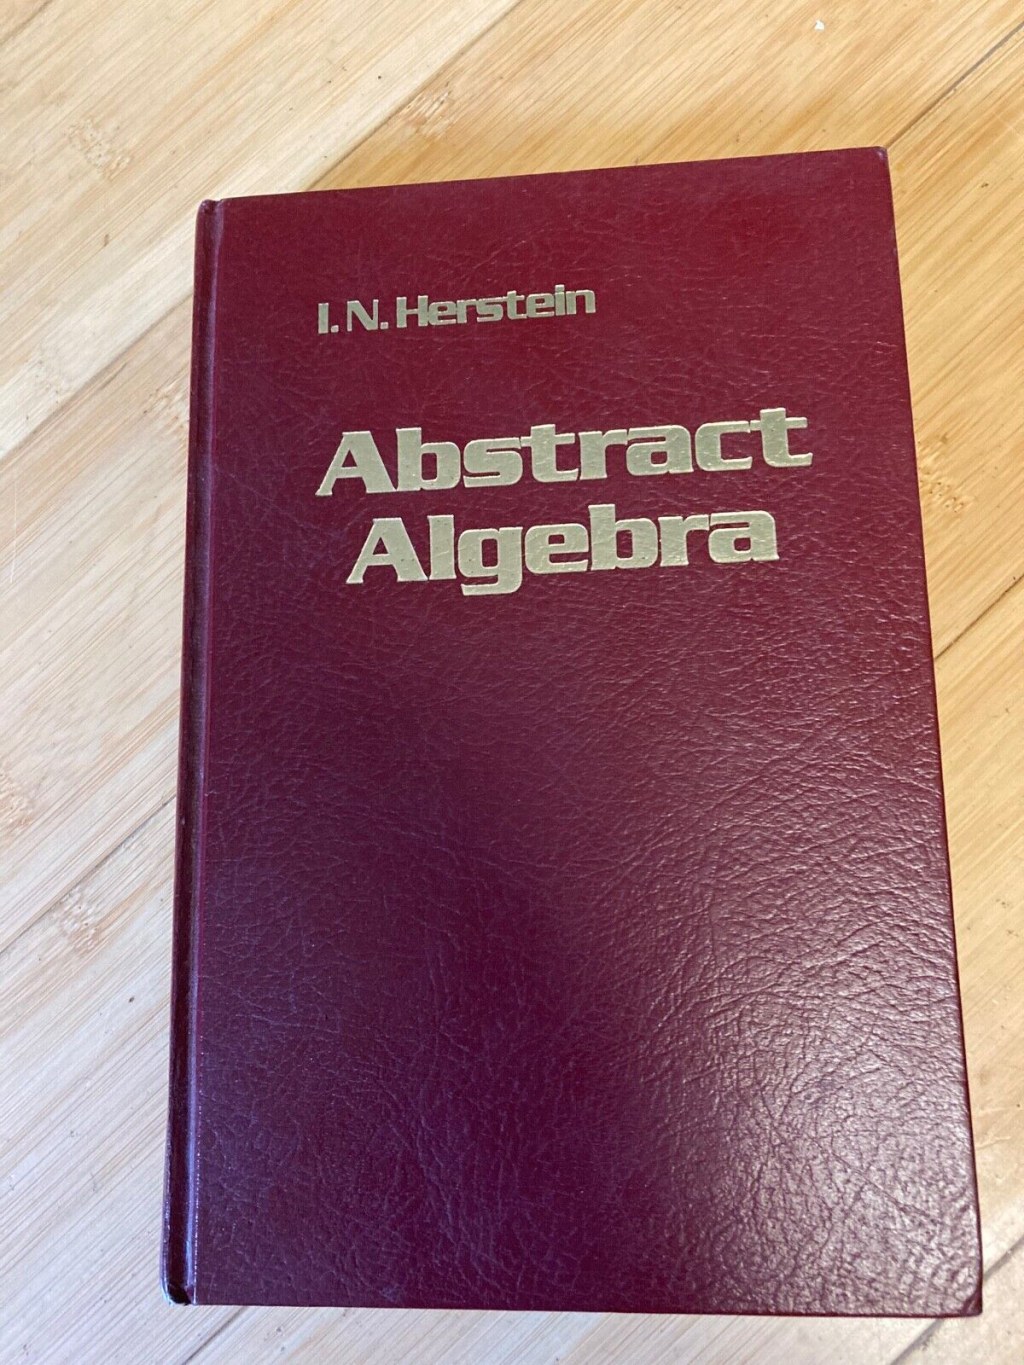 Picture of: Abstract Algebra by I. N